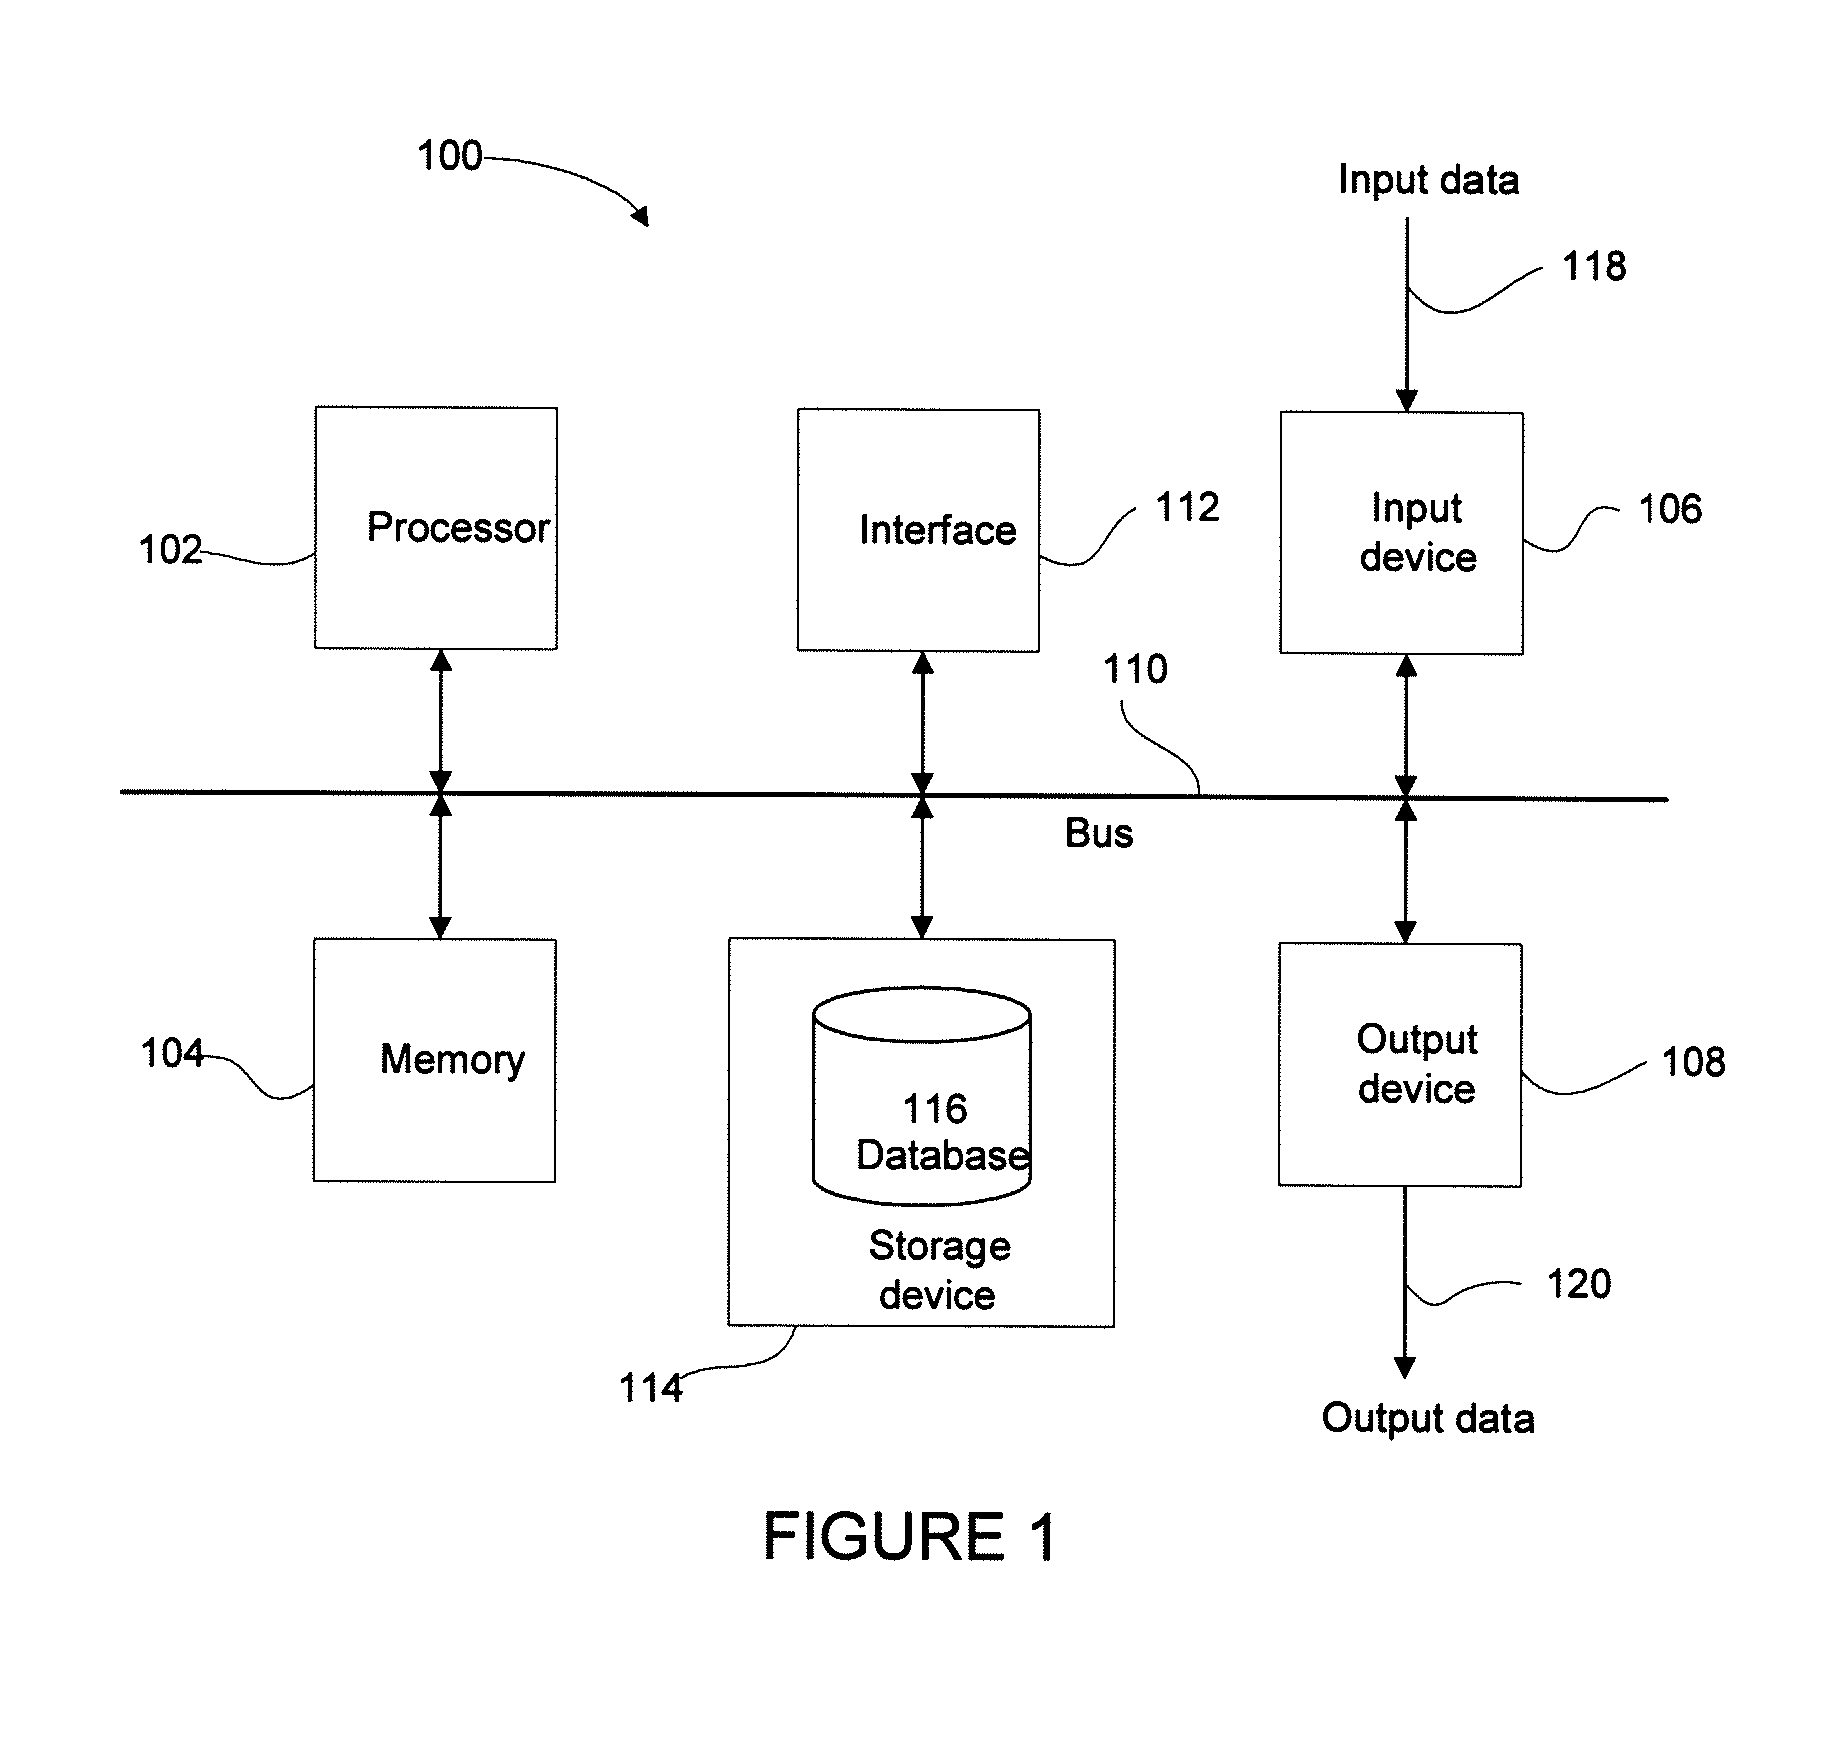 Performing application setting activity using a removable storage device